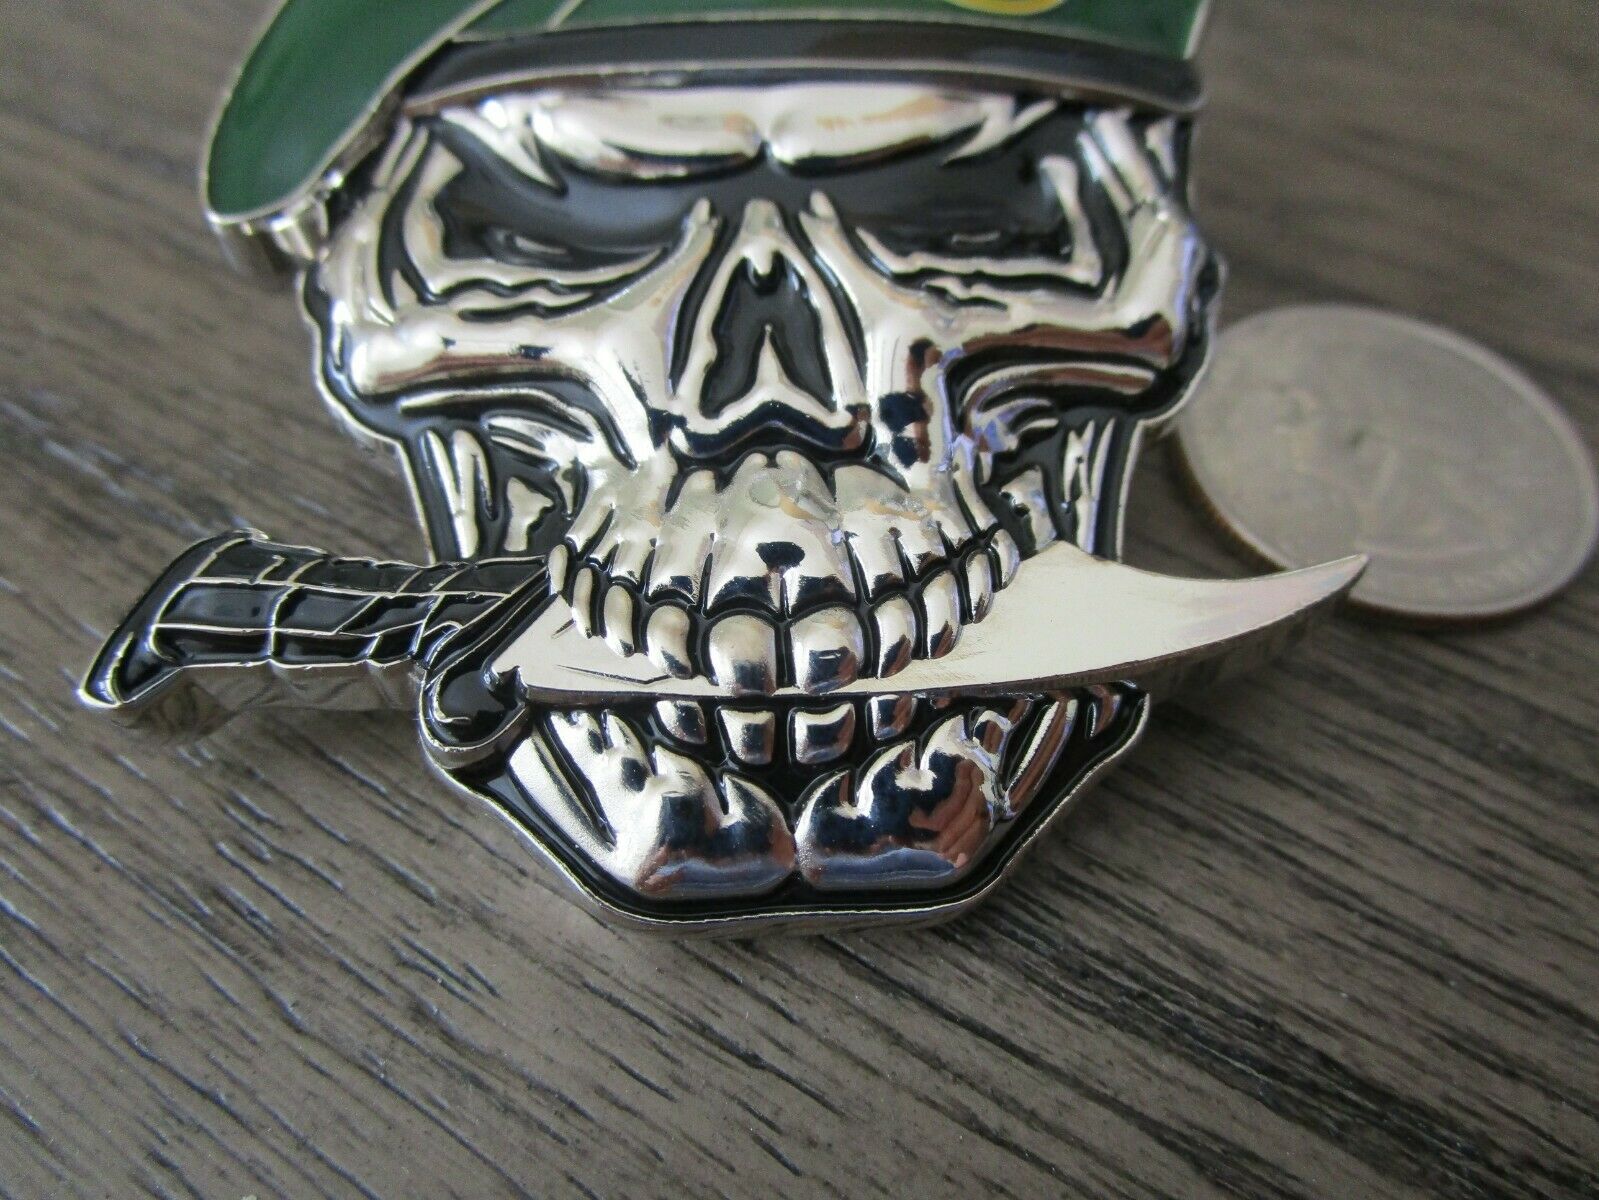 US Army 1st SFG(A) Special Forces Group Green Berets Creed Reapers Skull Challenge Coin